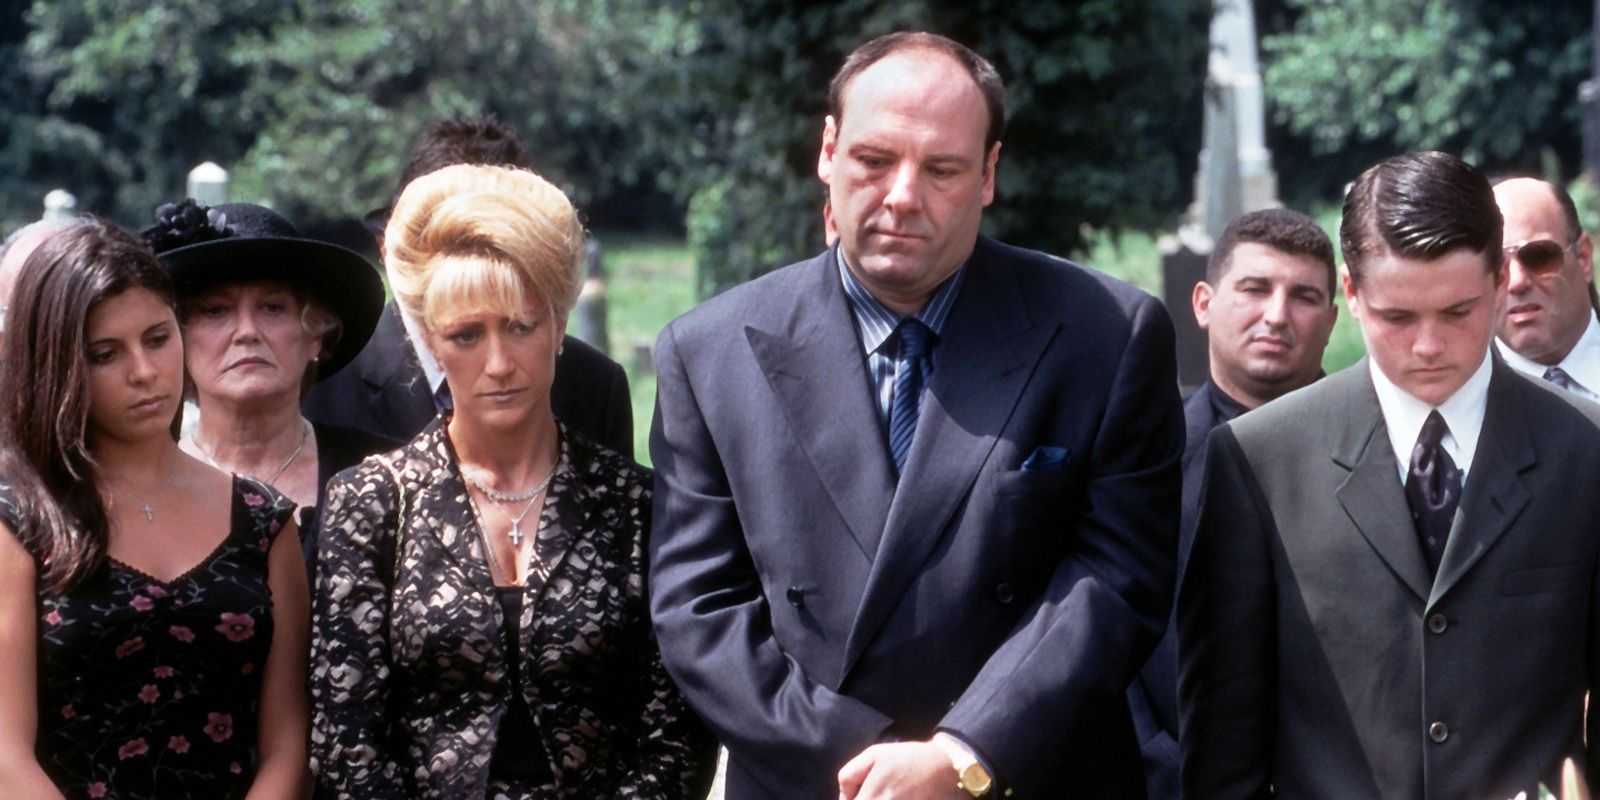 Characters of The Sopranos stand at a funeral